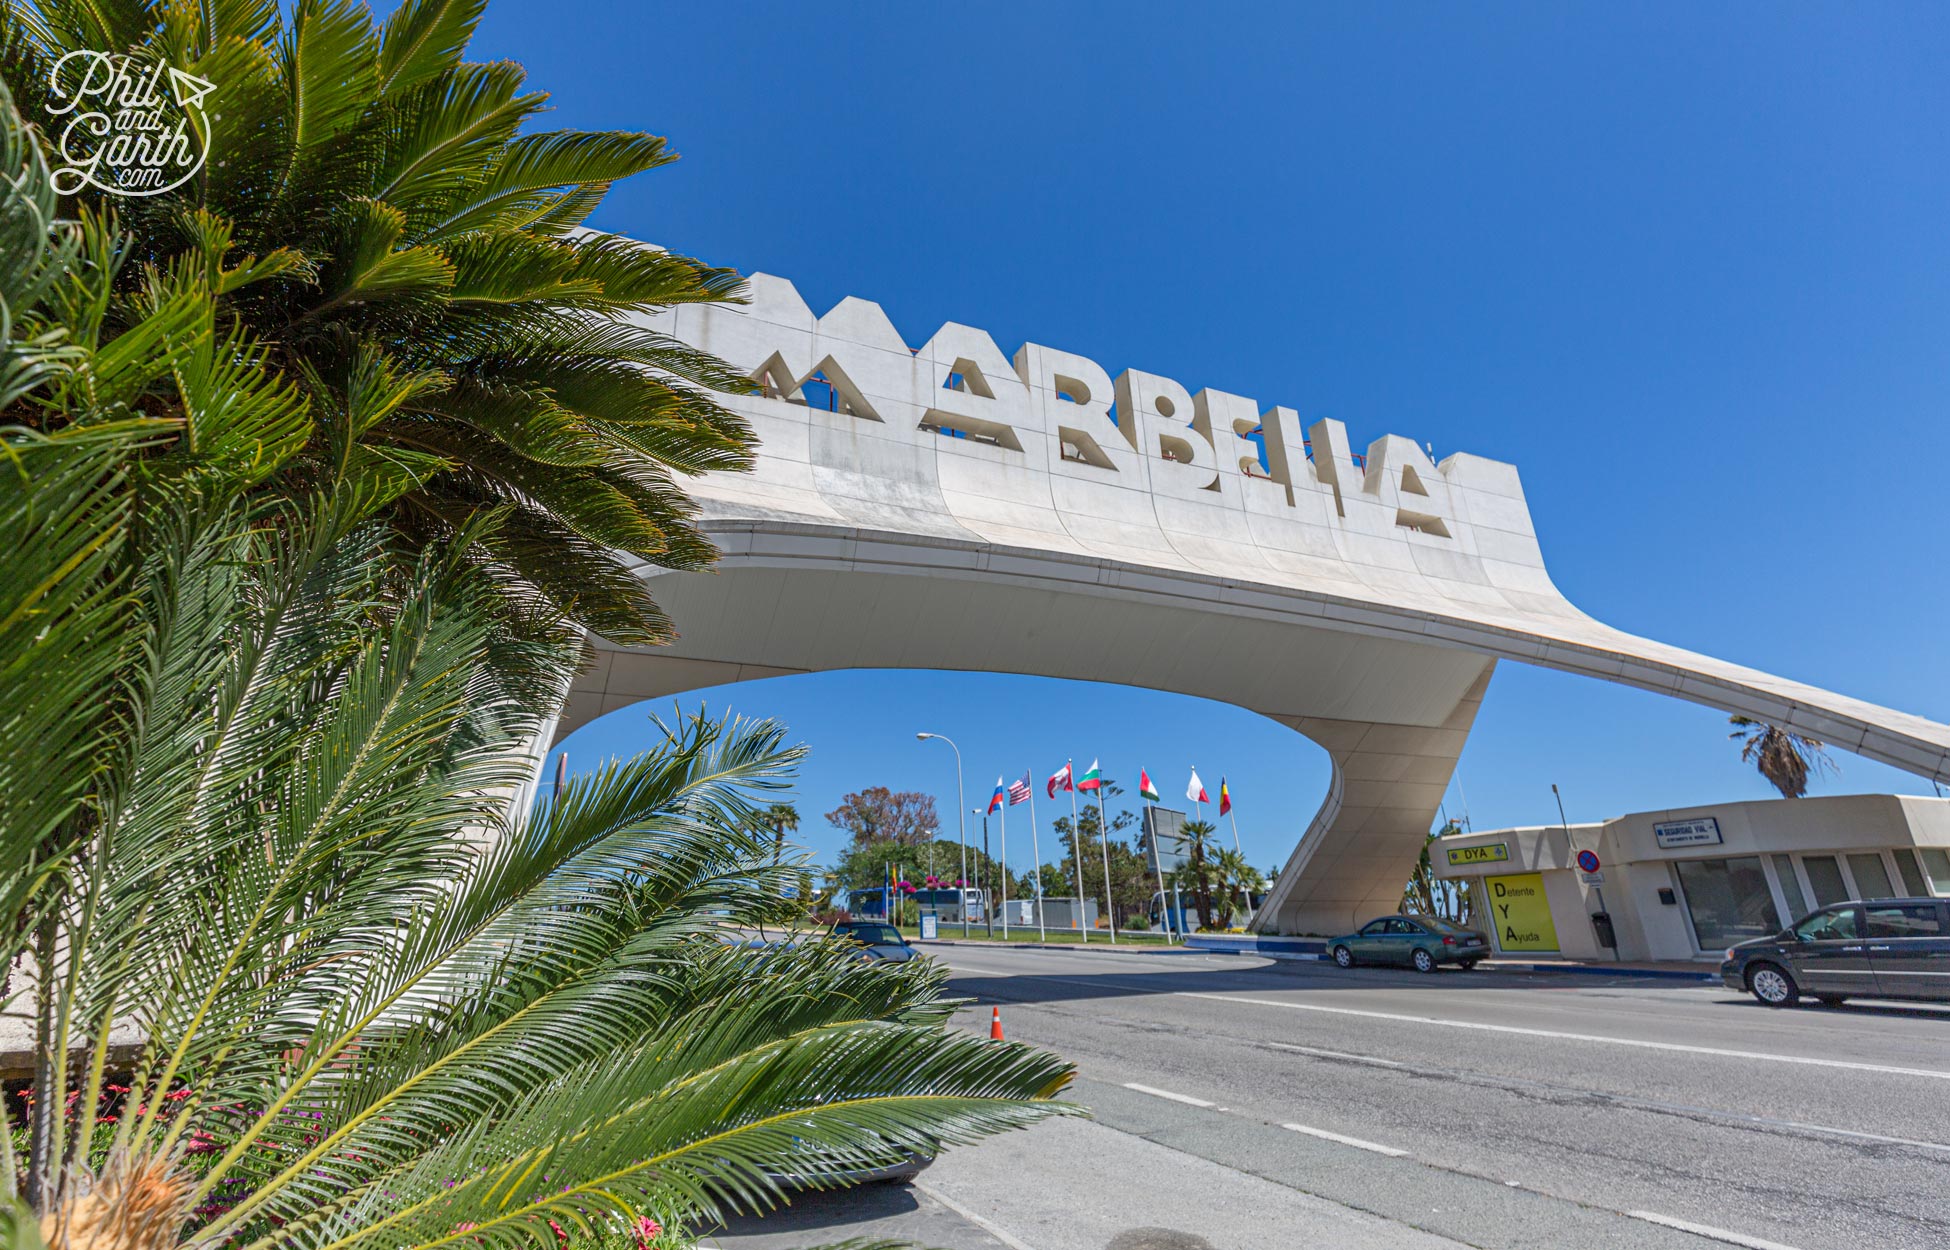 Upmarket Marbella is a 45 minute drive from Malaga airport